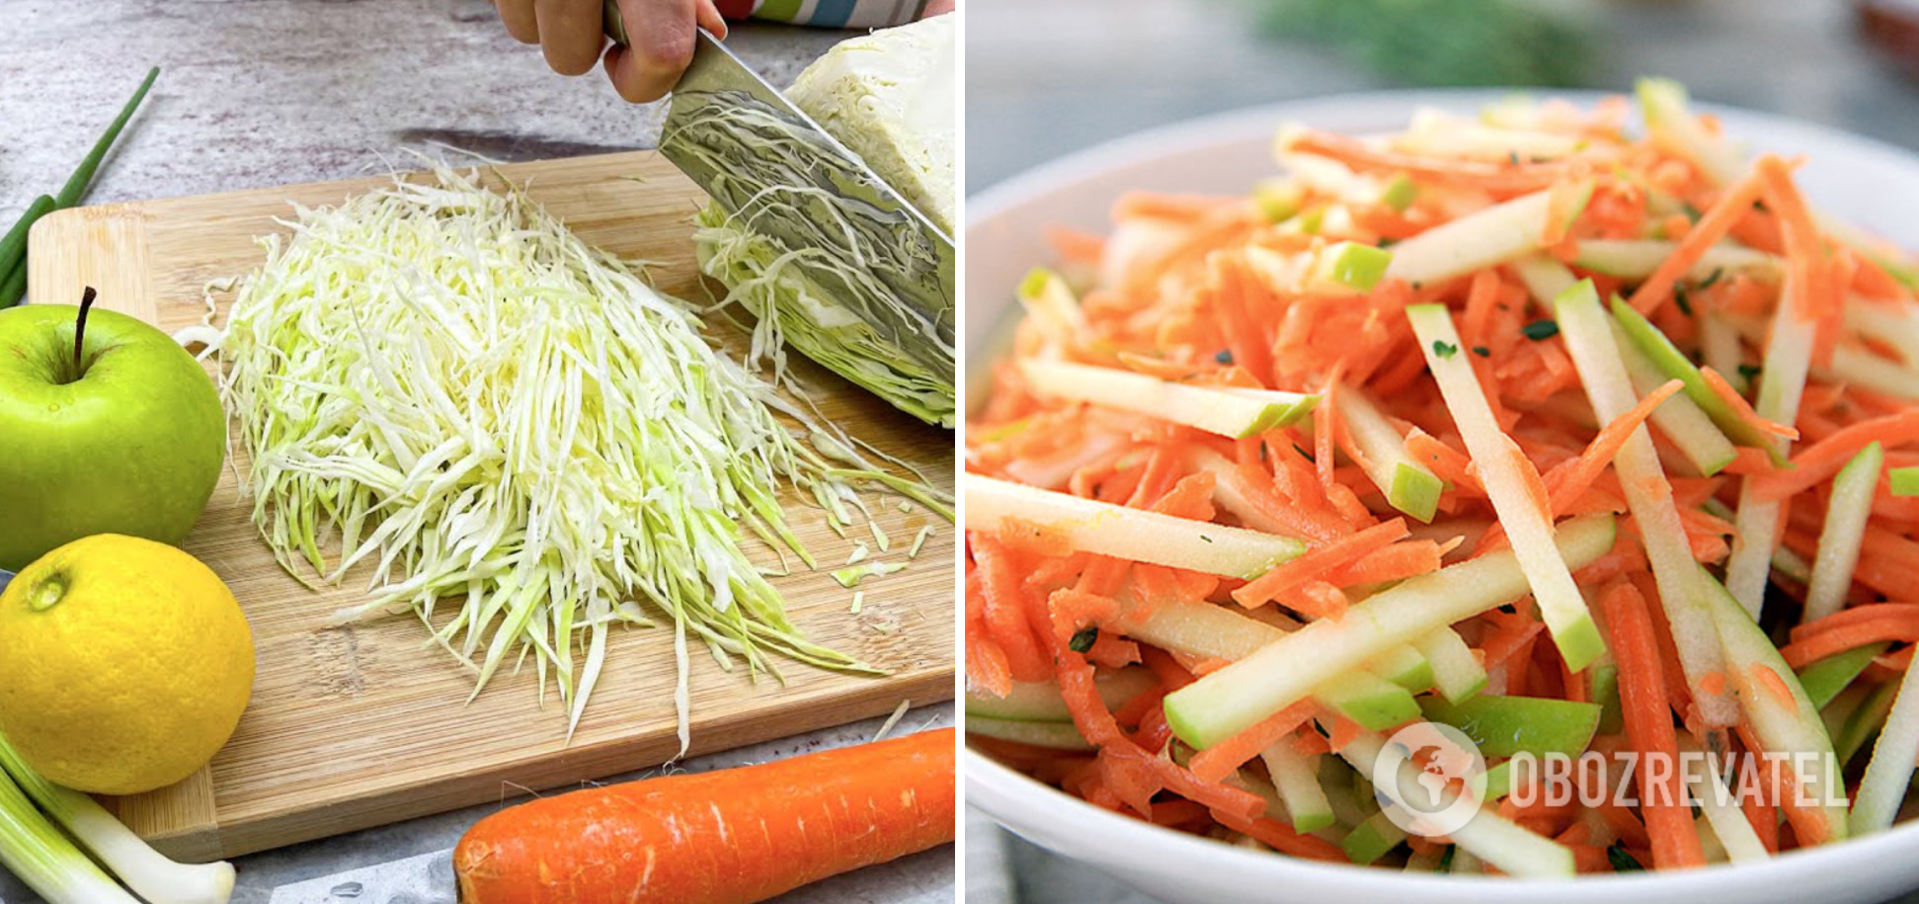 Healthy salad with cabbage, carrots and apples